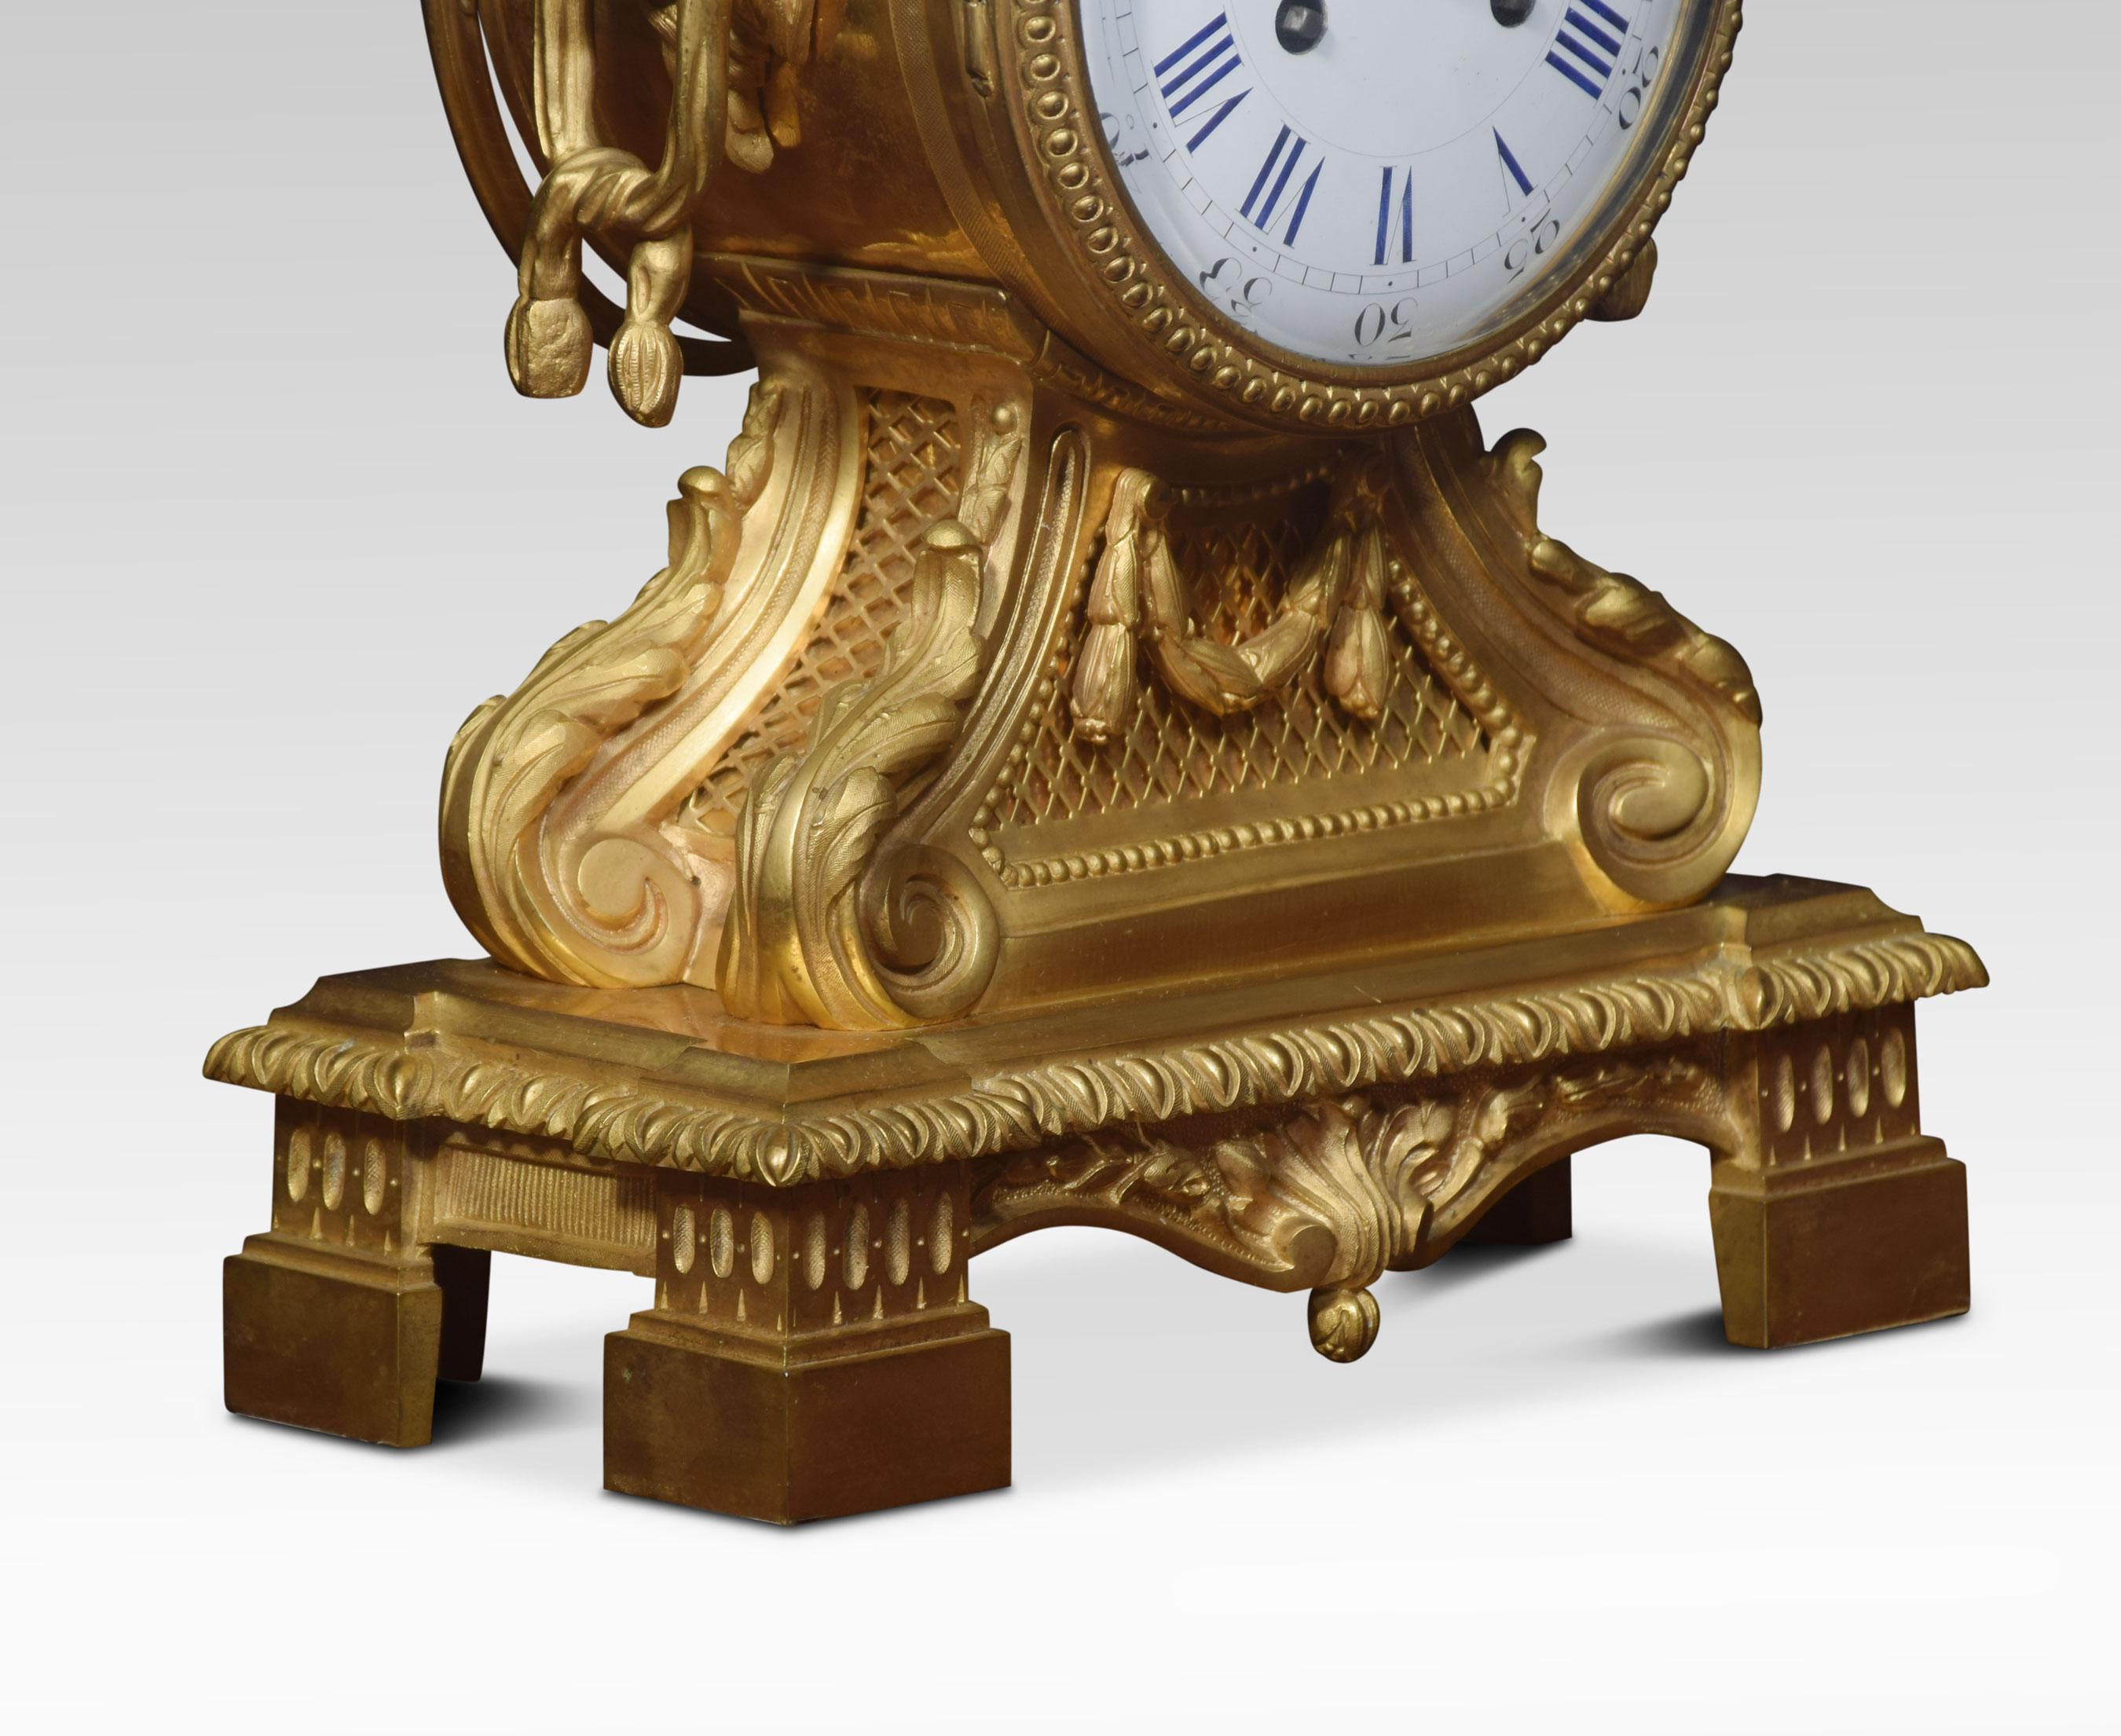 Late 19th century French gilt metal mantel clock, the case surmounted with an urn-shaped finial, above the enameled dial with Roman and Arabic numerals enclosing the two-train movement stamped ‘Depose’ and striking on a bell. The case cast with